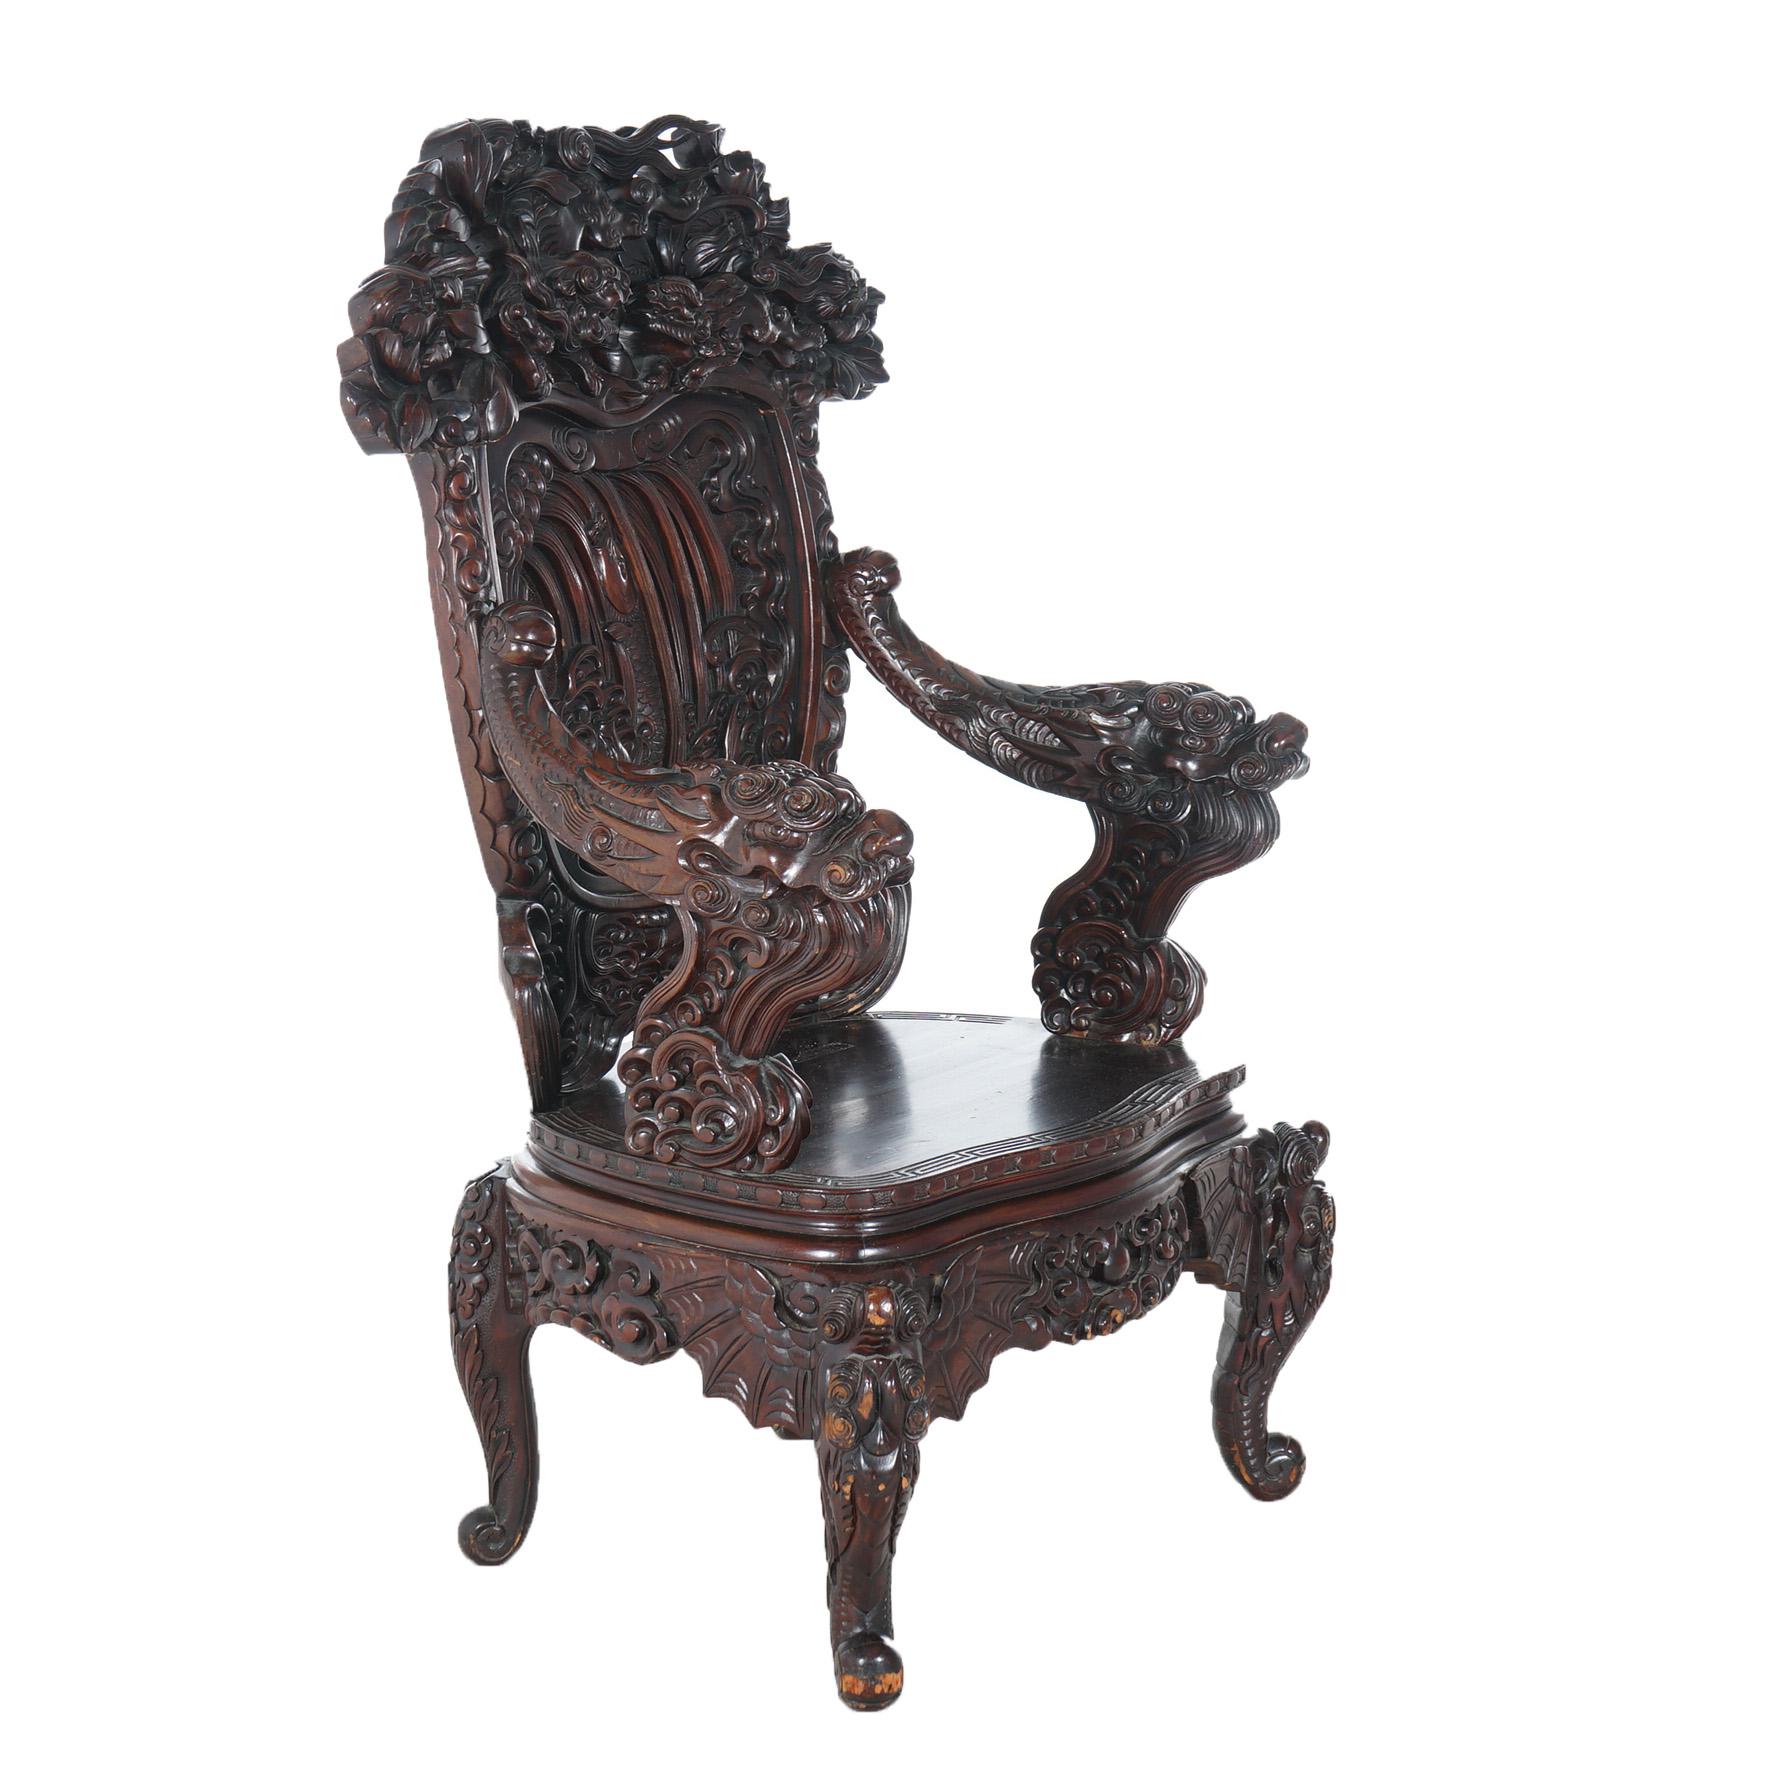 Antique Chinese Deep Carved Rosewood Figural King Throne Chair with Dragons 1920 For Sale 7